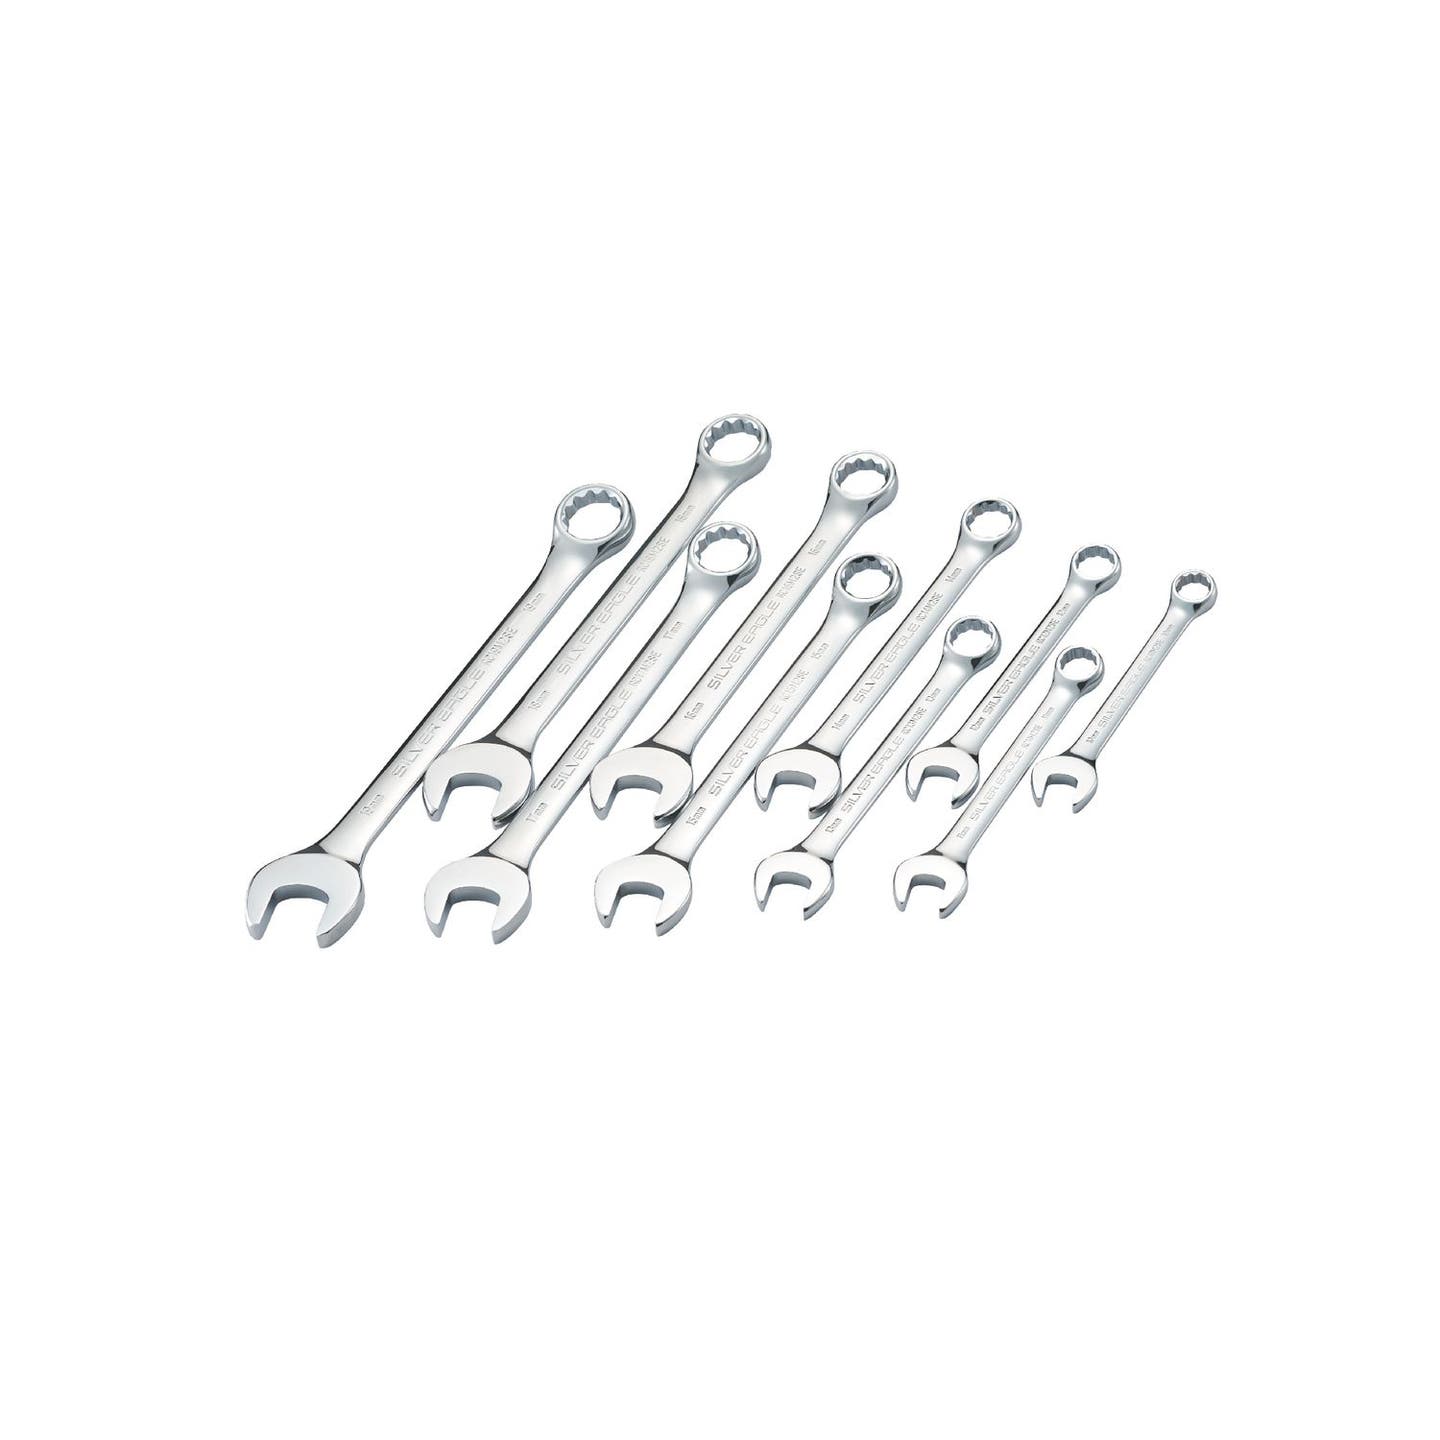 10 PIECE SILVER EAGLE METRIC COMBO WRENCH SET